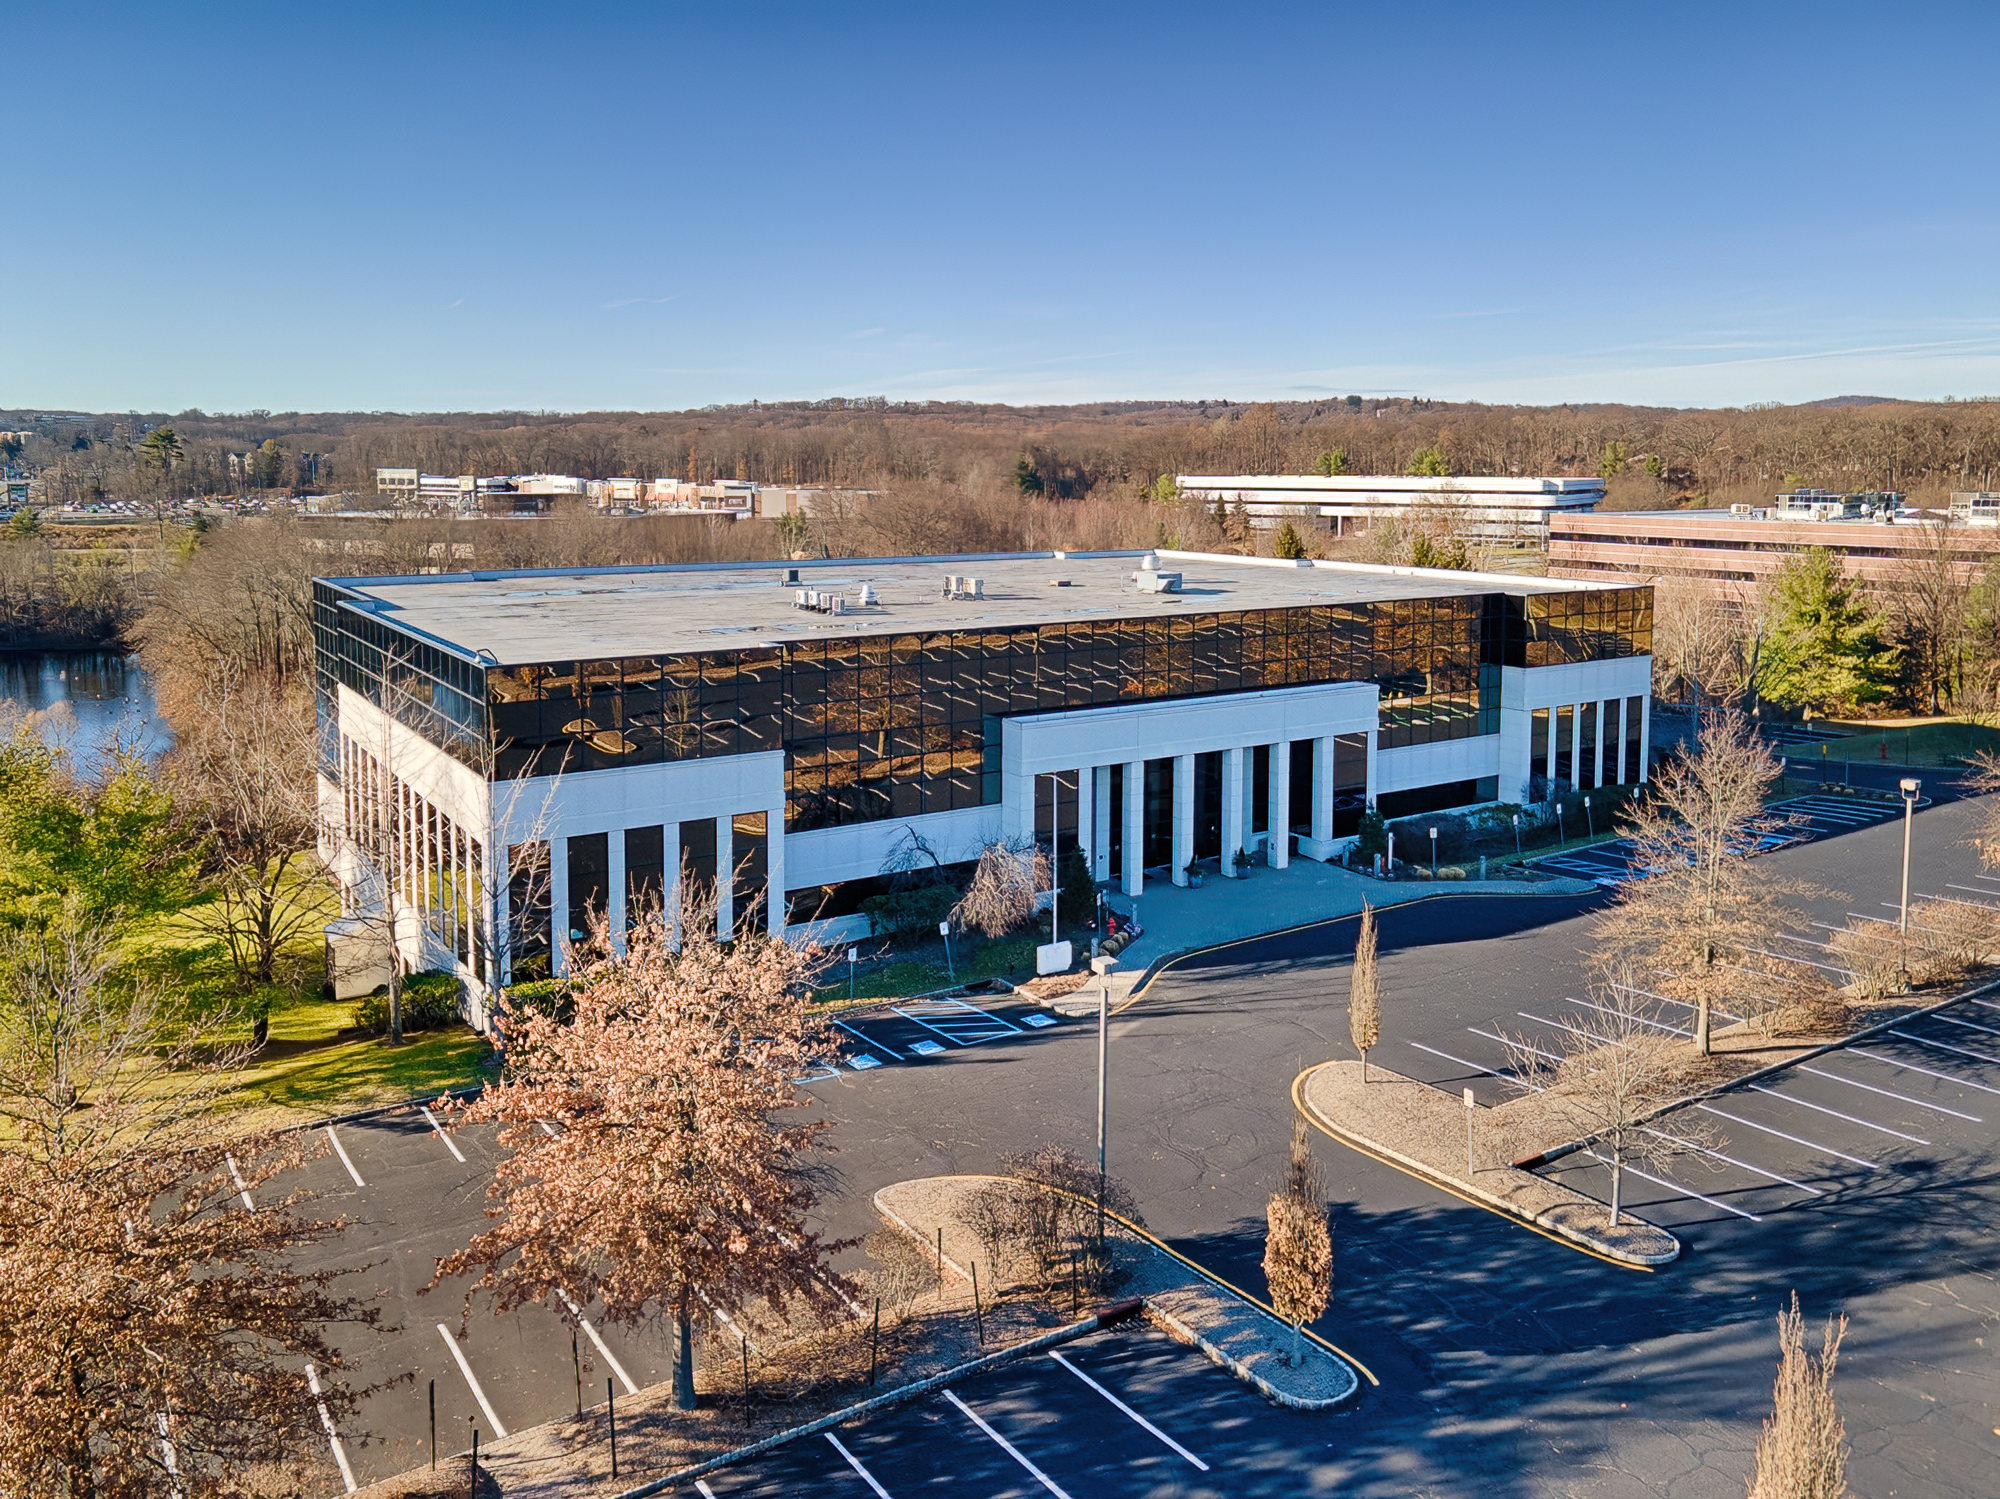 Commercial Real Estate Photography